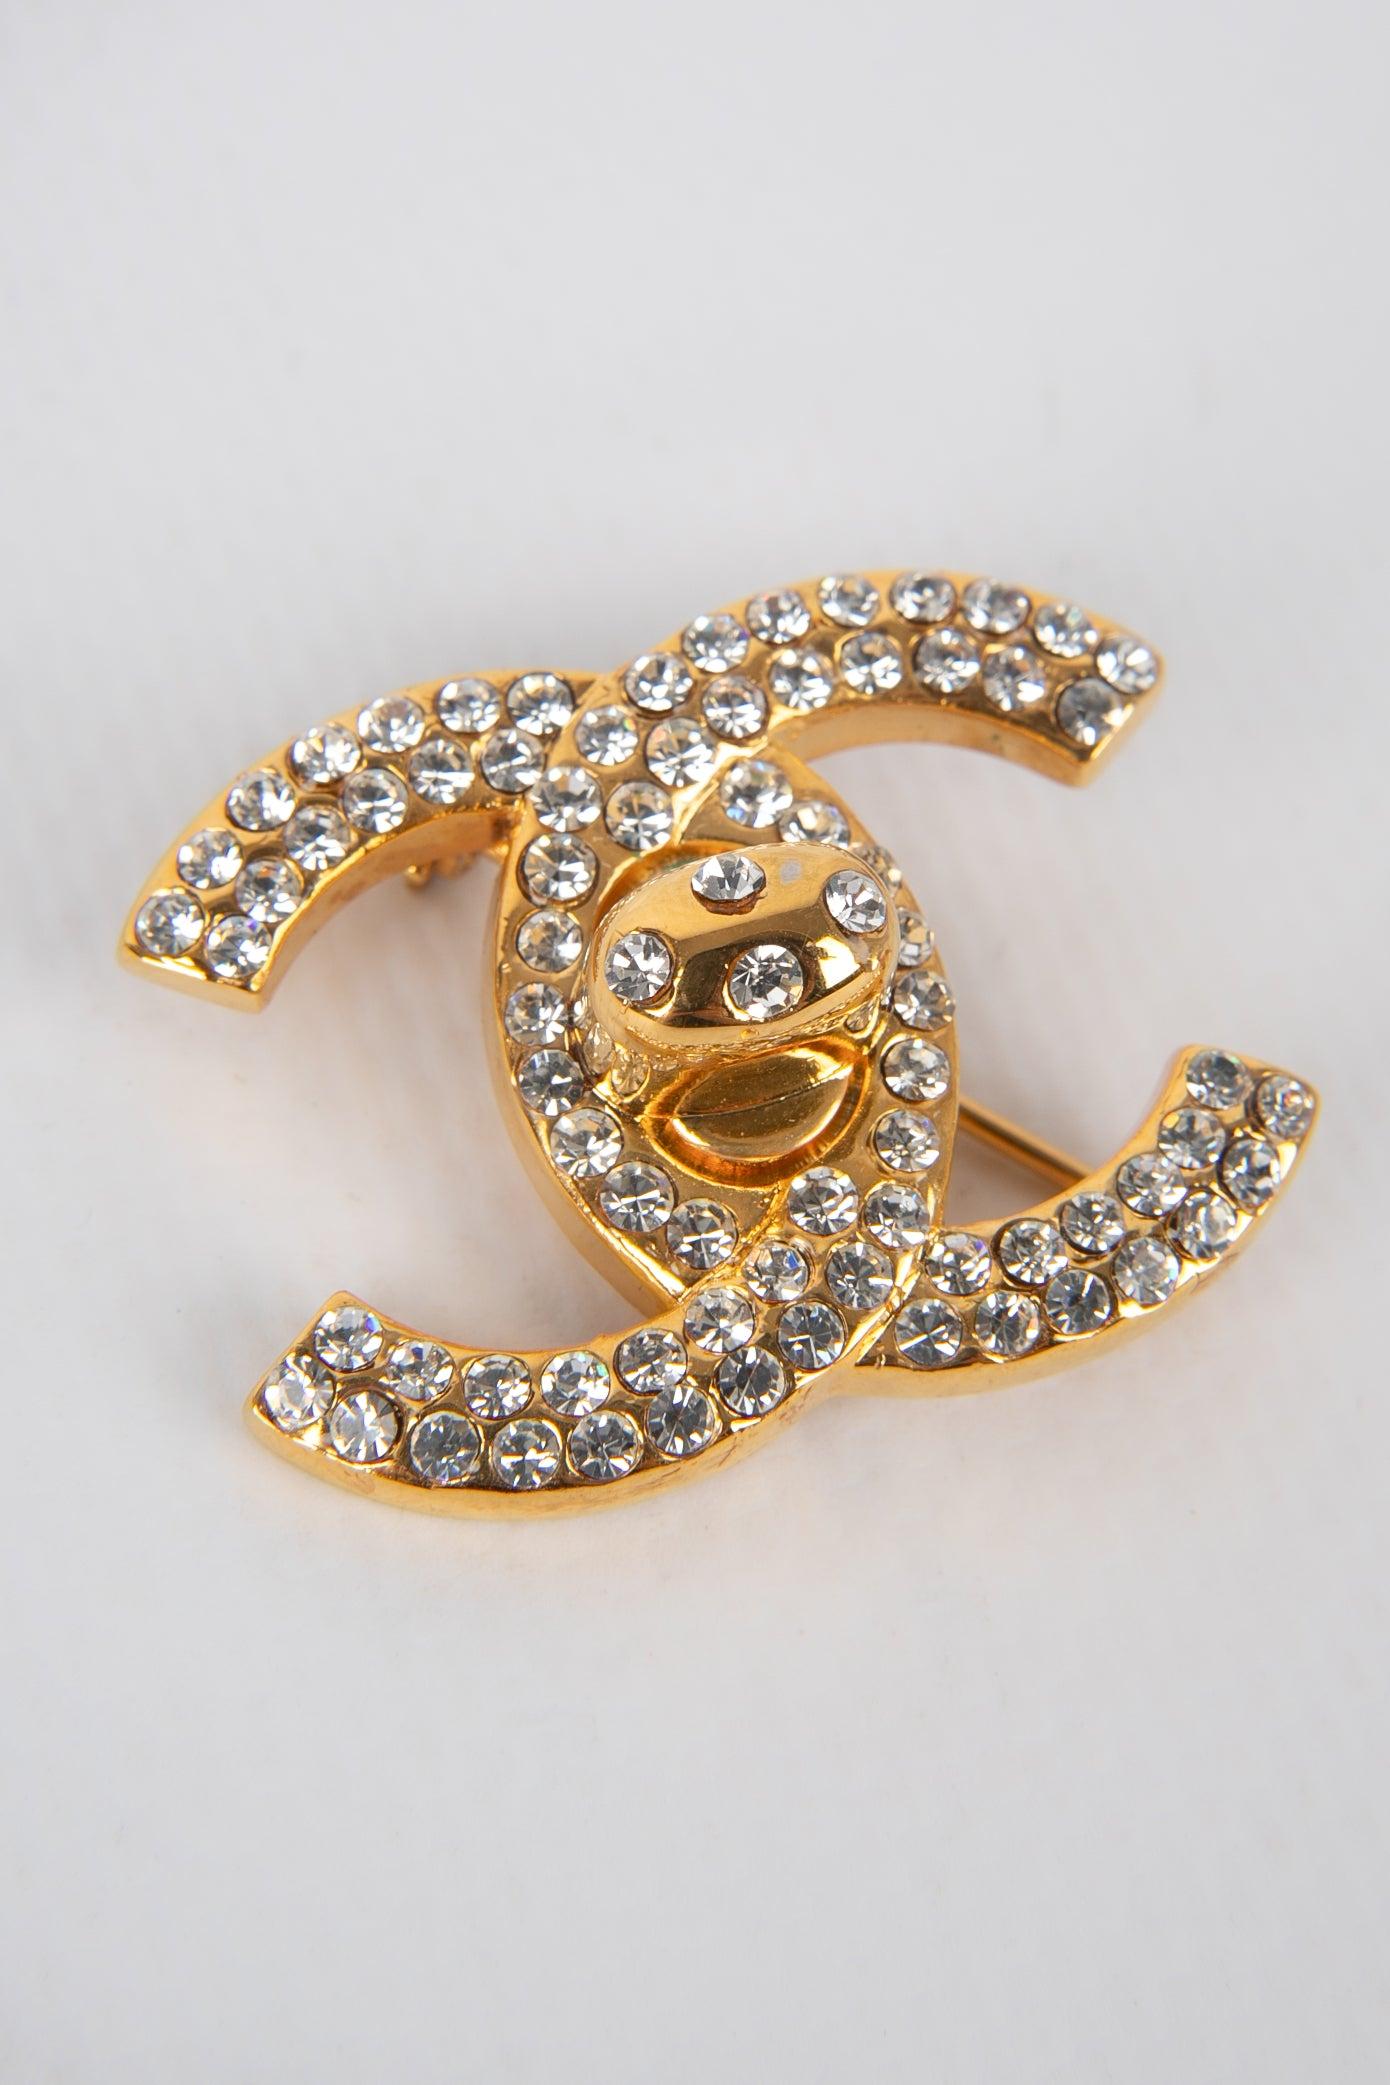 Chanel- (Made in France) Golden metal turnlock brooch ornamented with Swarovski rhinestones. 1996 Fall-Winter Collection.

Additional information:
Condition: Very good condition
Dimensions: Height: 2.5 cm
Period: 20th Century

Seller Reference: